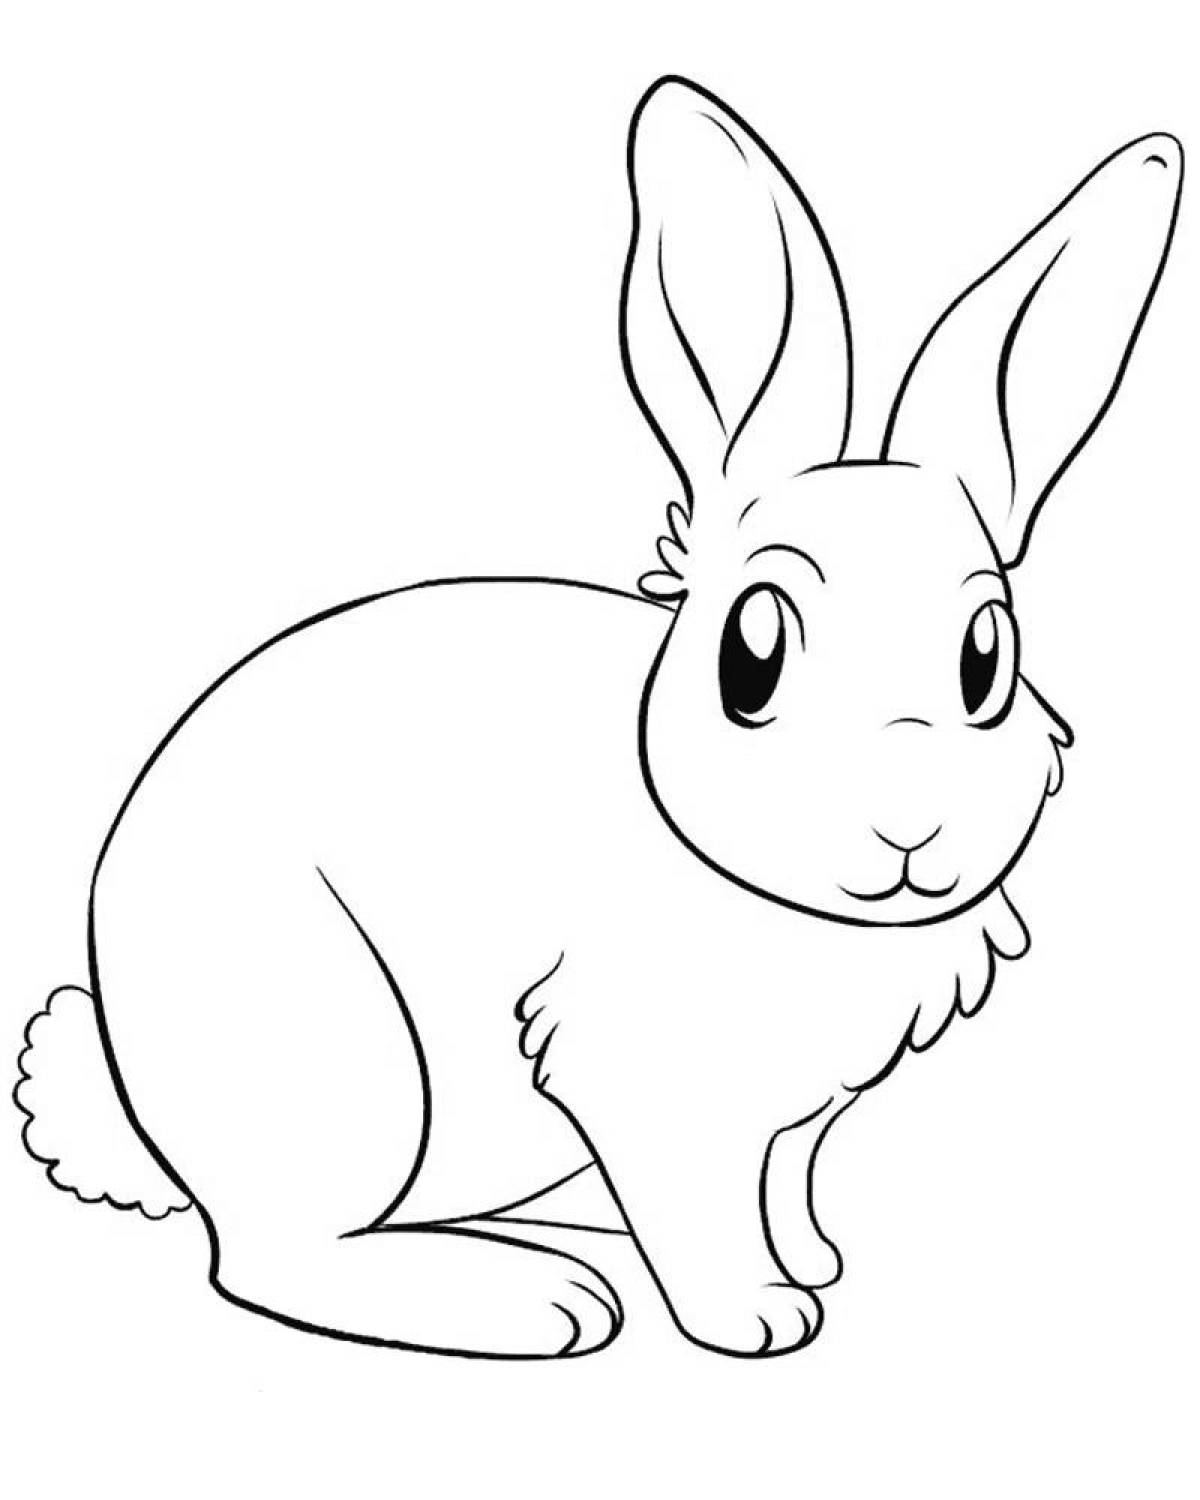 Coloring book rabbit for games for kids